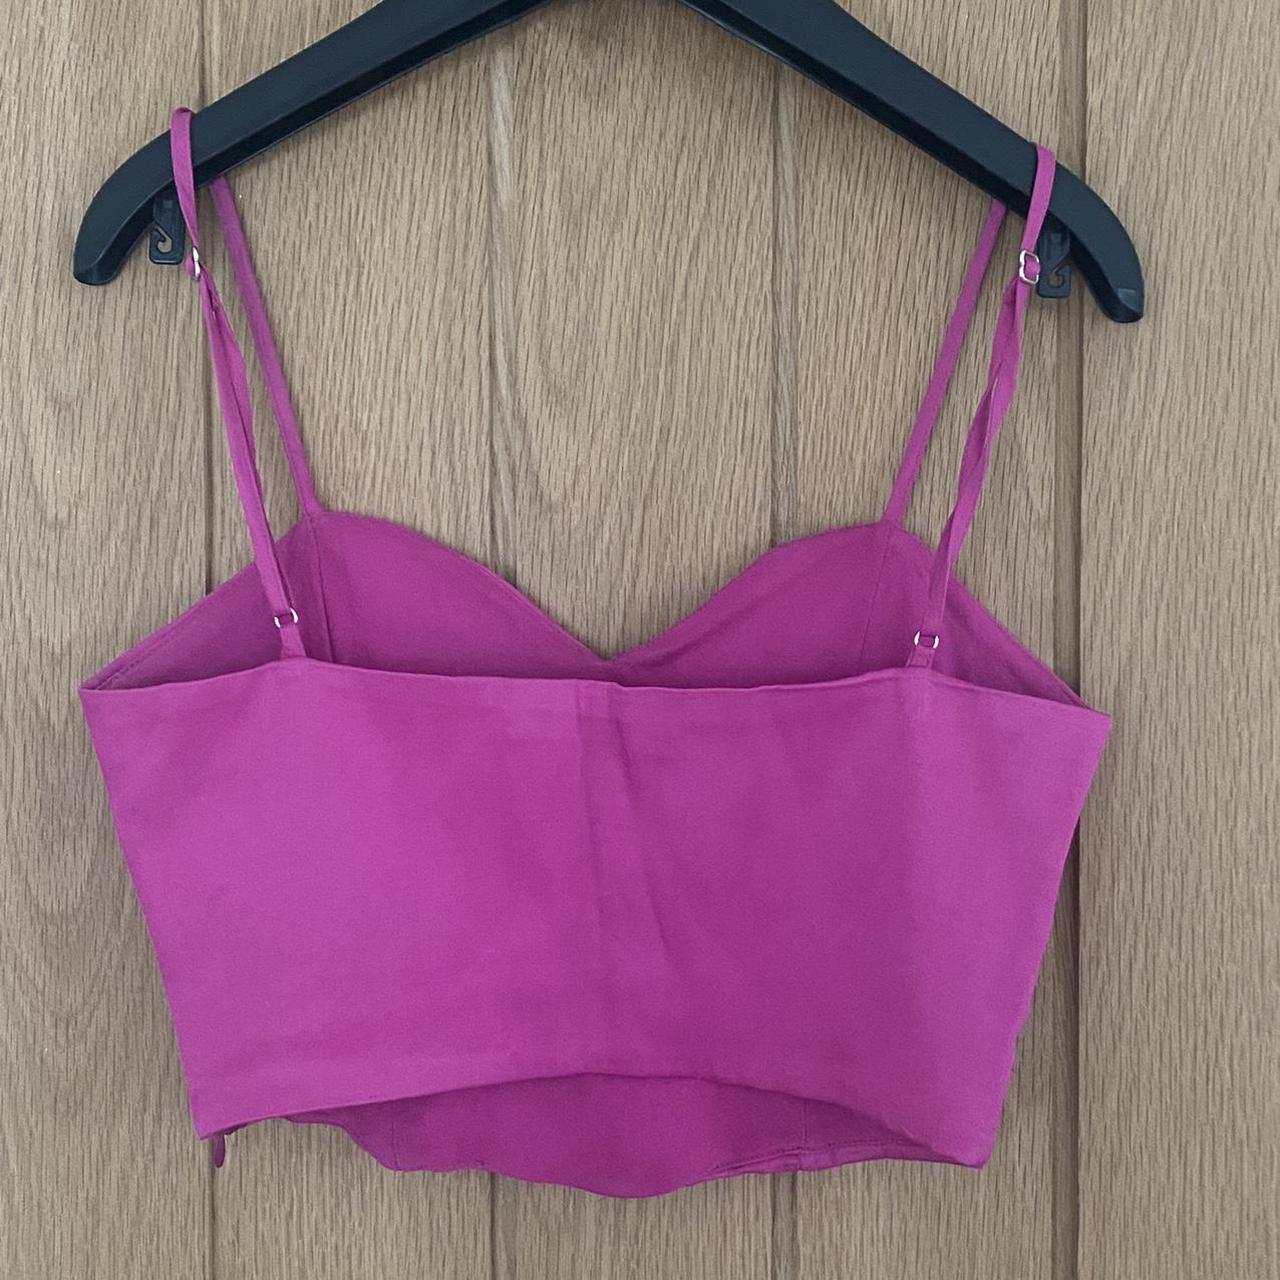 Zara- Pink Corset Top NEW WITH TAGS! – DETOURE